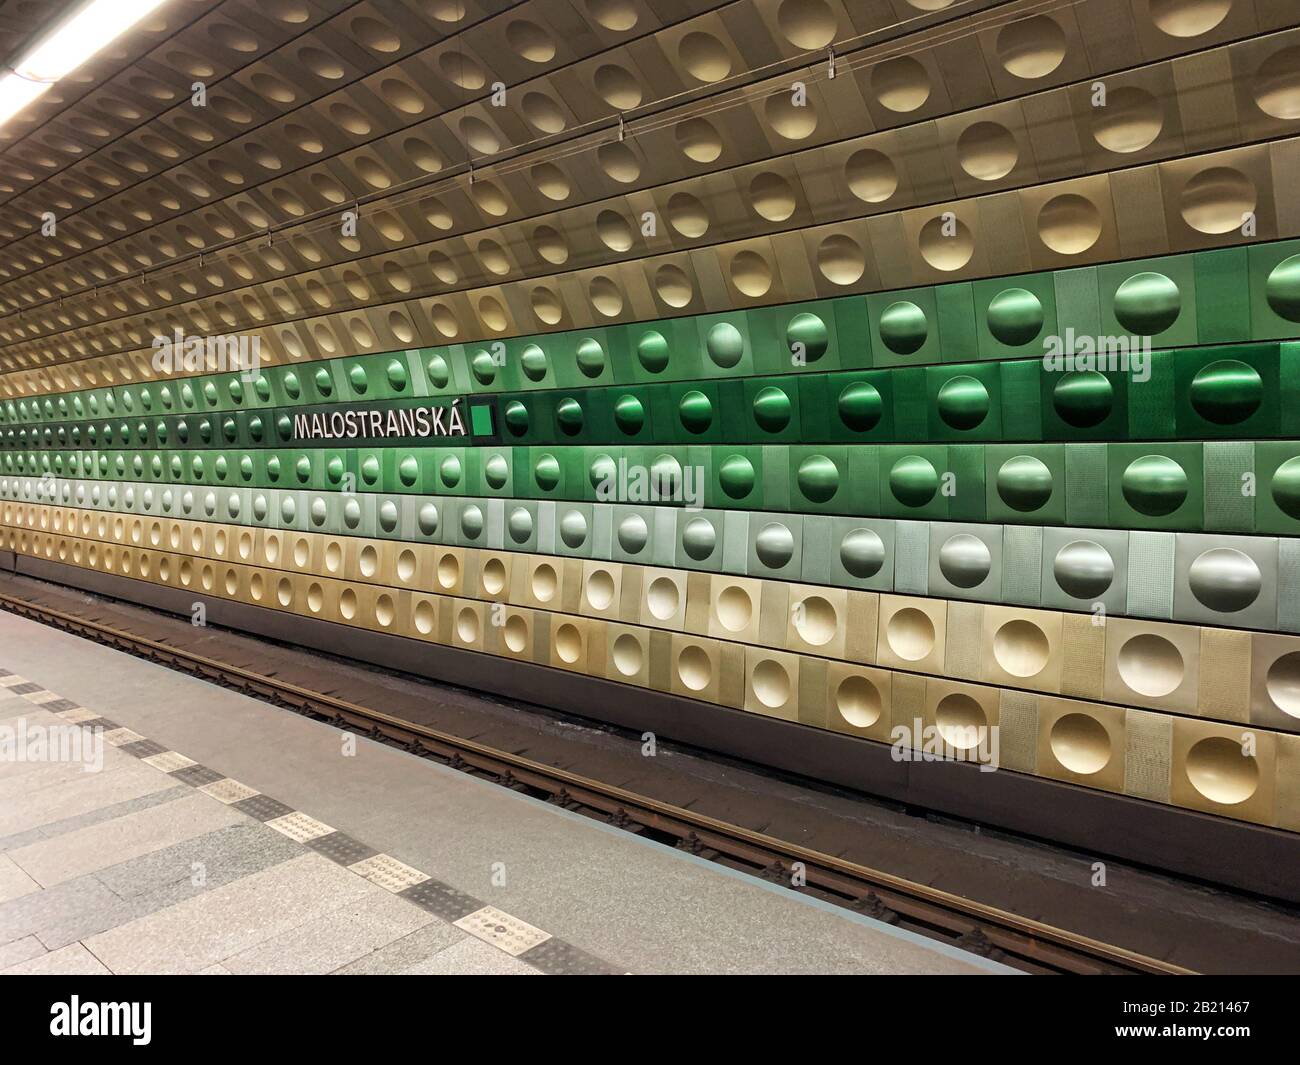 View of the Malostranska Metro Station in Prague, Czech Republic. The Prague metro system is extremely efficient, clean and inexpensive. Stock Photo